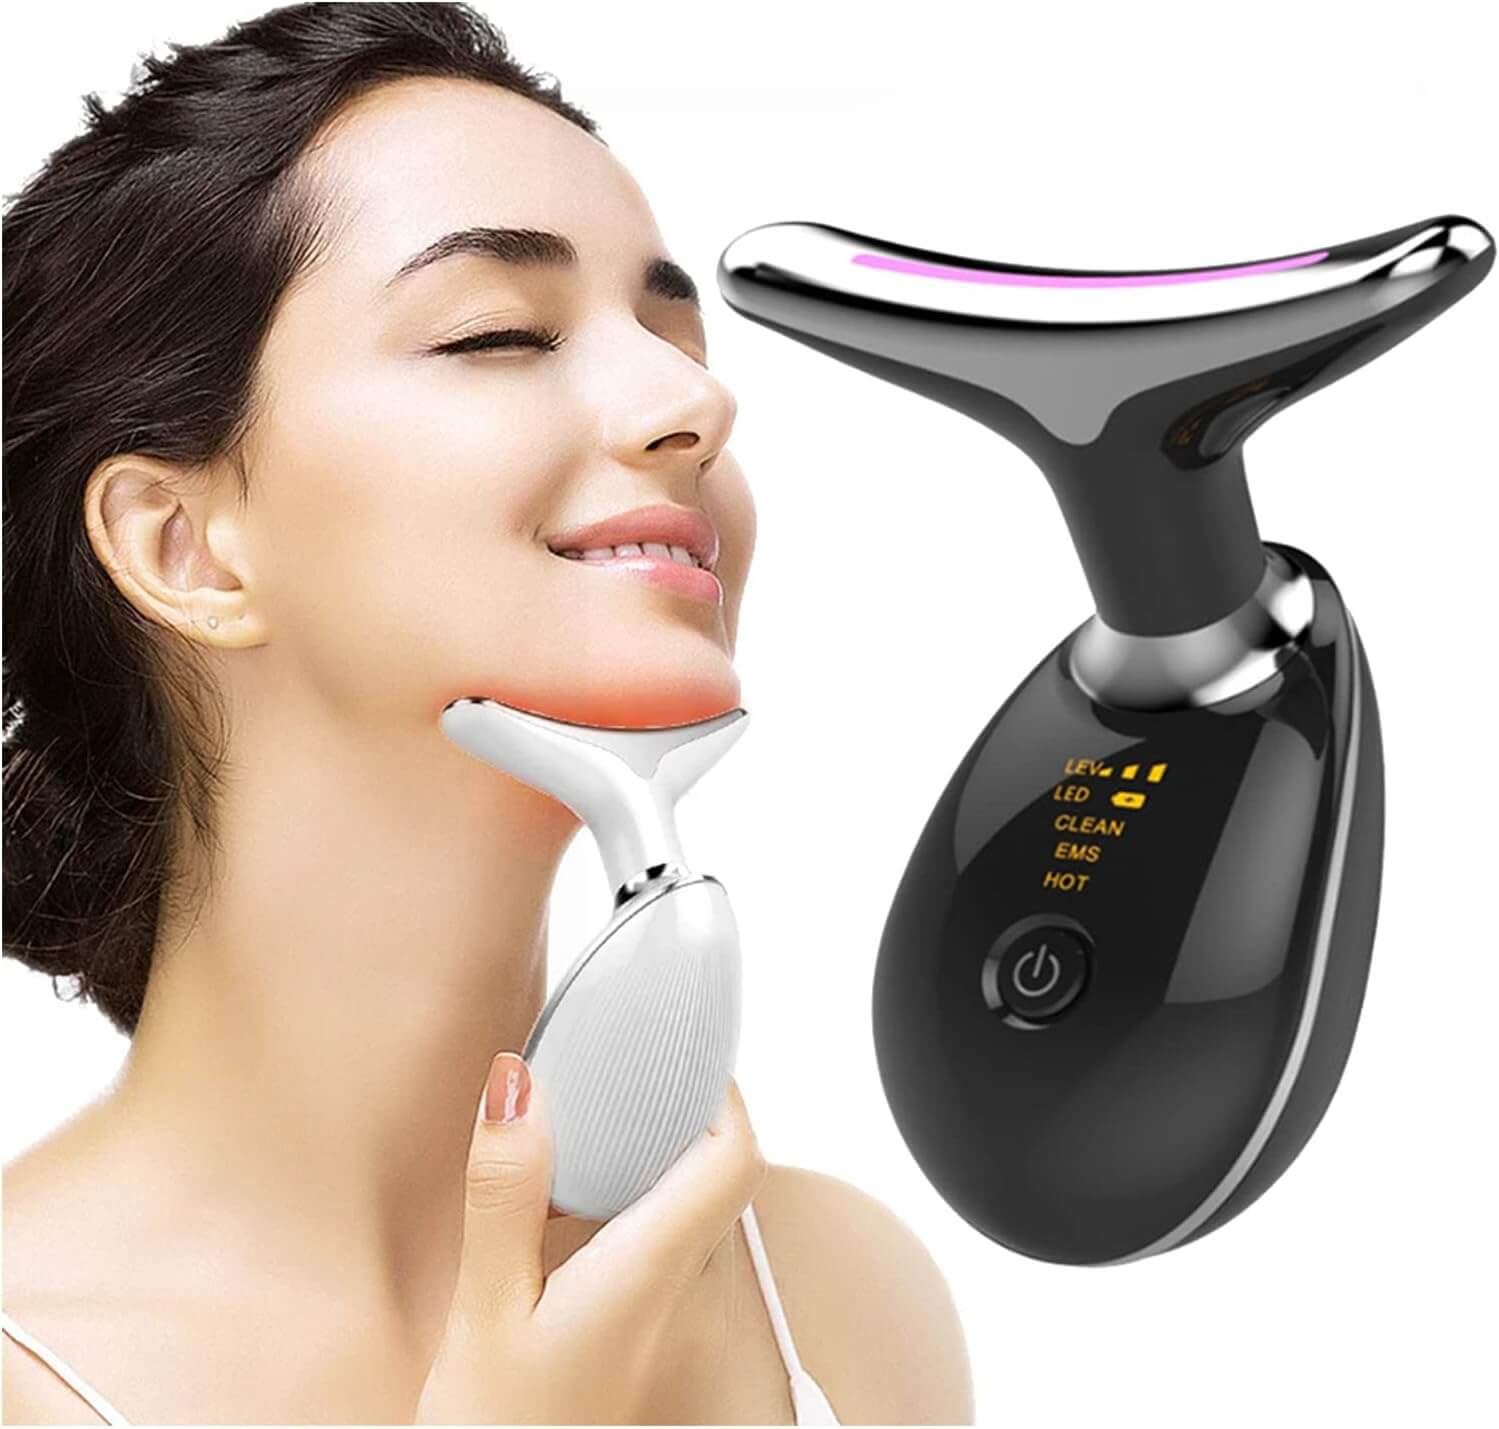 A model using the white Neck Face Tightening Massager. A large black Neck Face Tightening Massager next to the model.